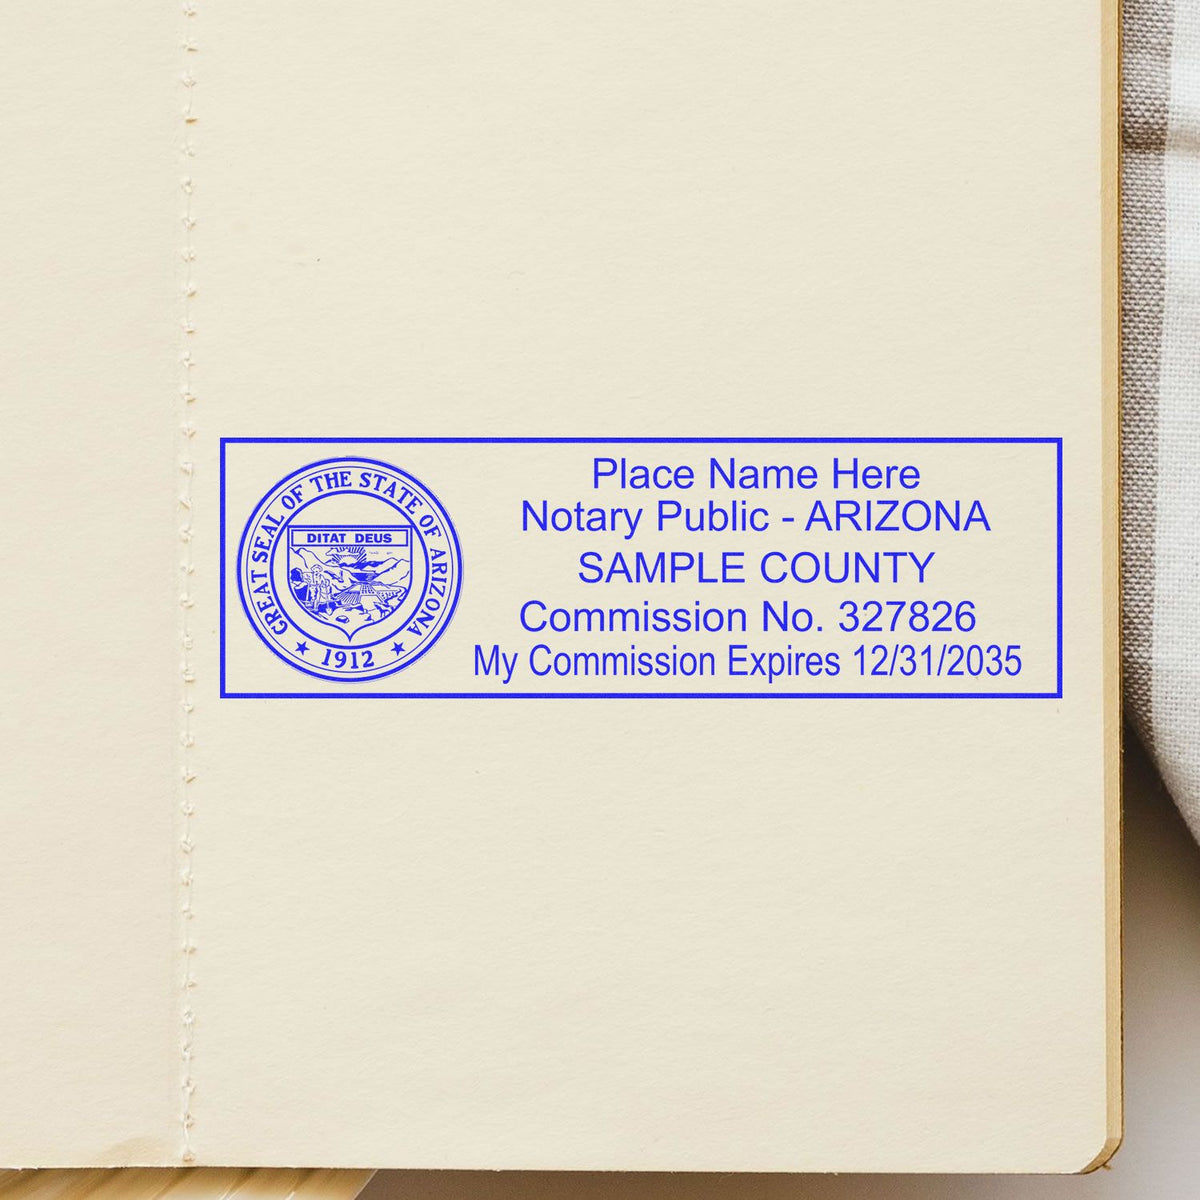 A lifestyle photo showing a stamped image of the Wooden Handle Arizona State Seal Notary Public Stamp on a piece of paper